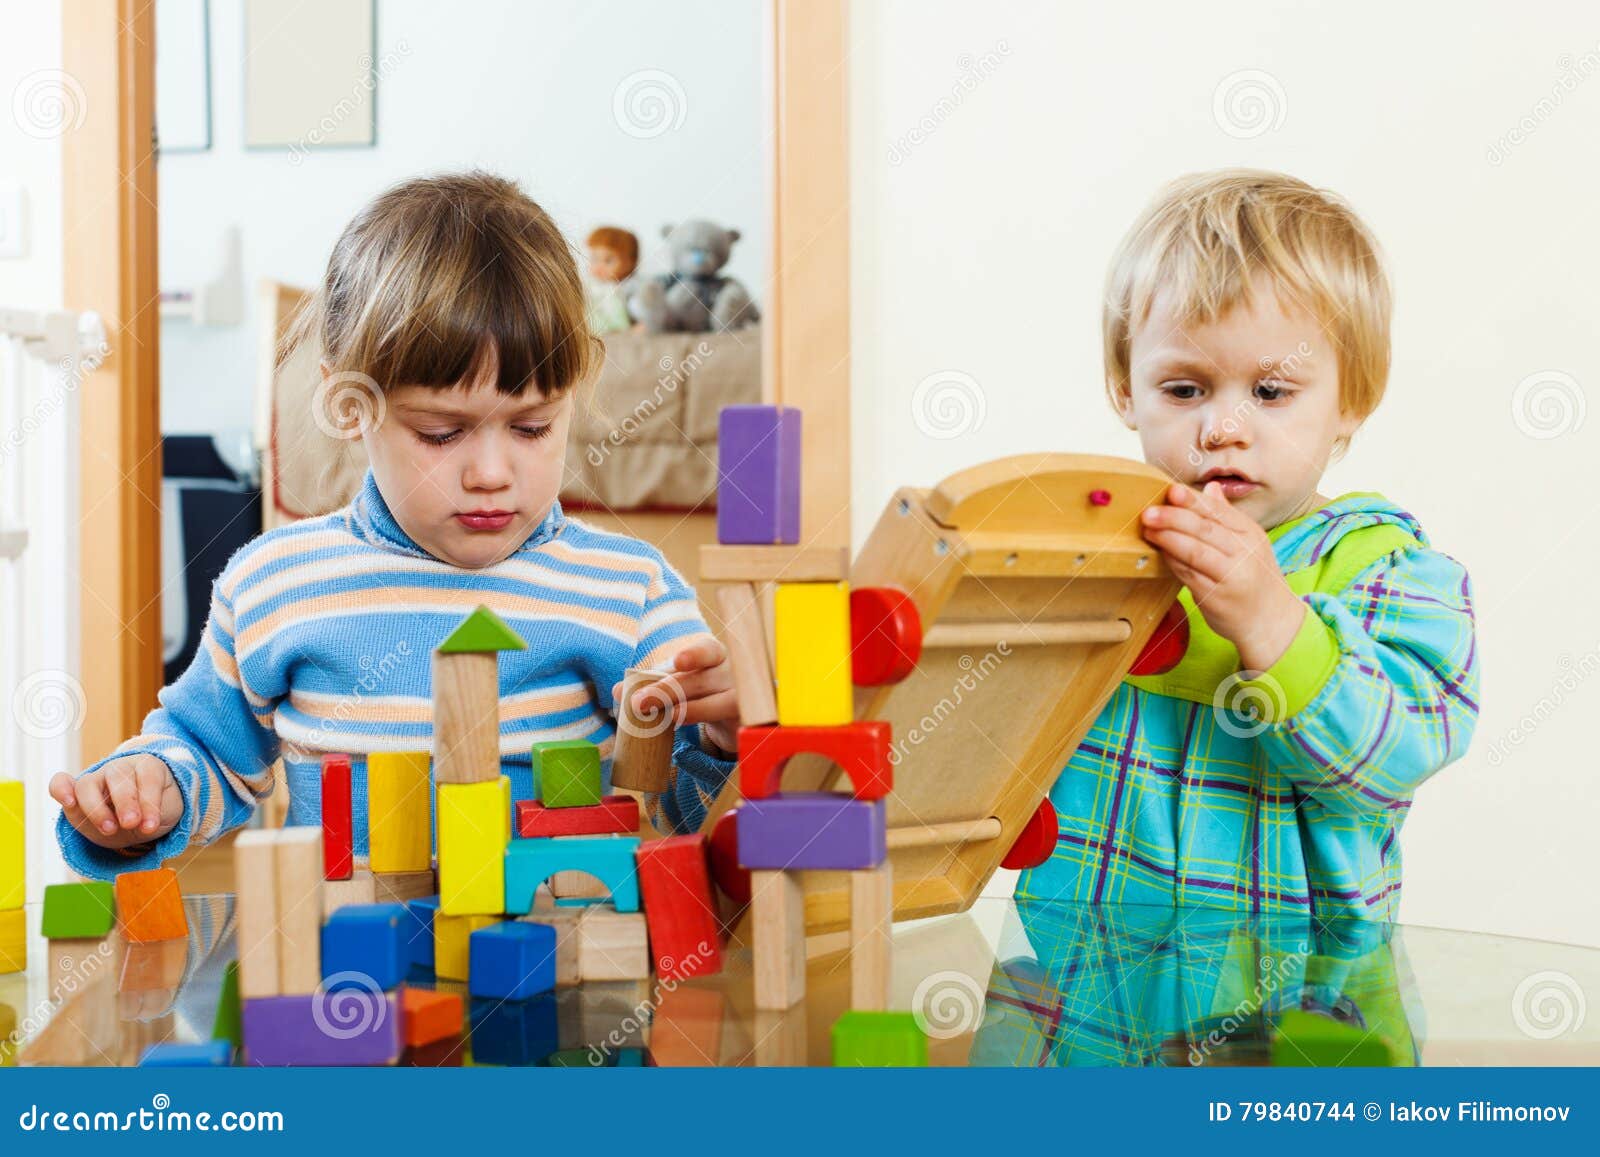 A study on blocks and block play in childrens development domains